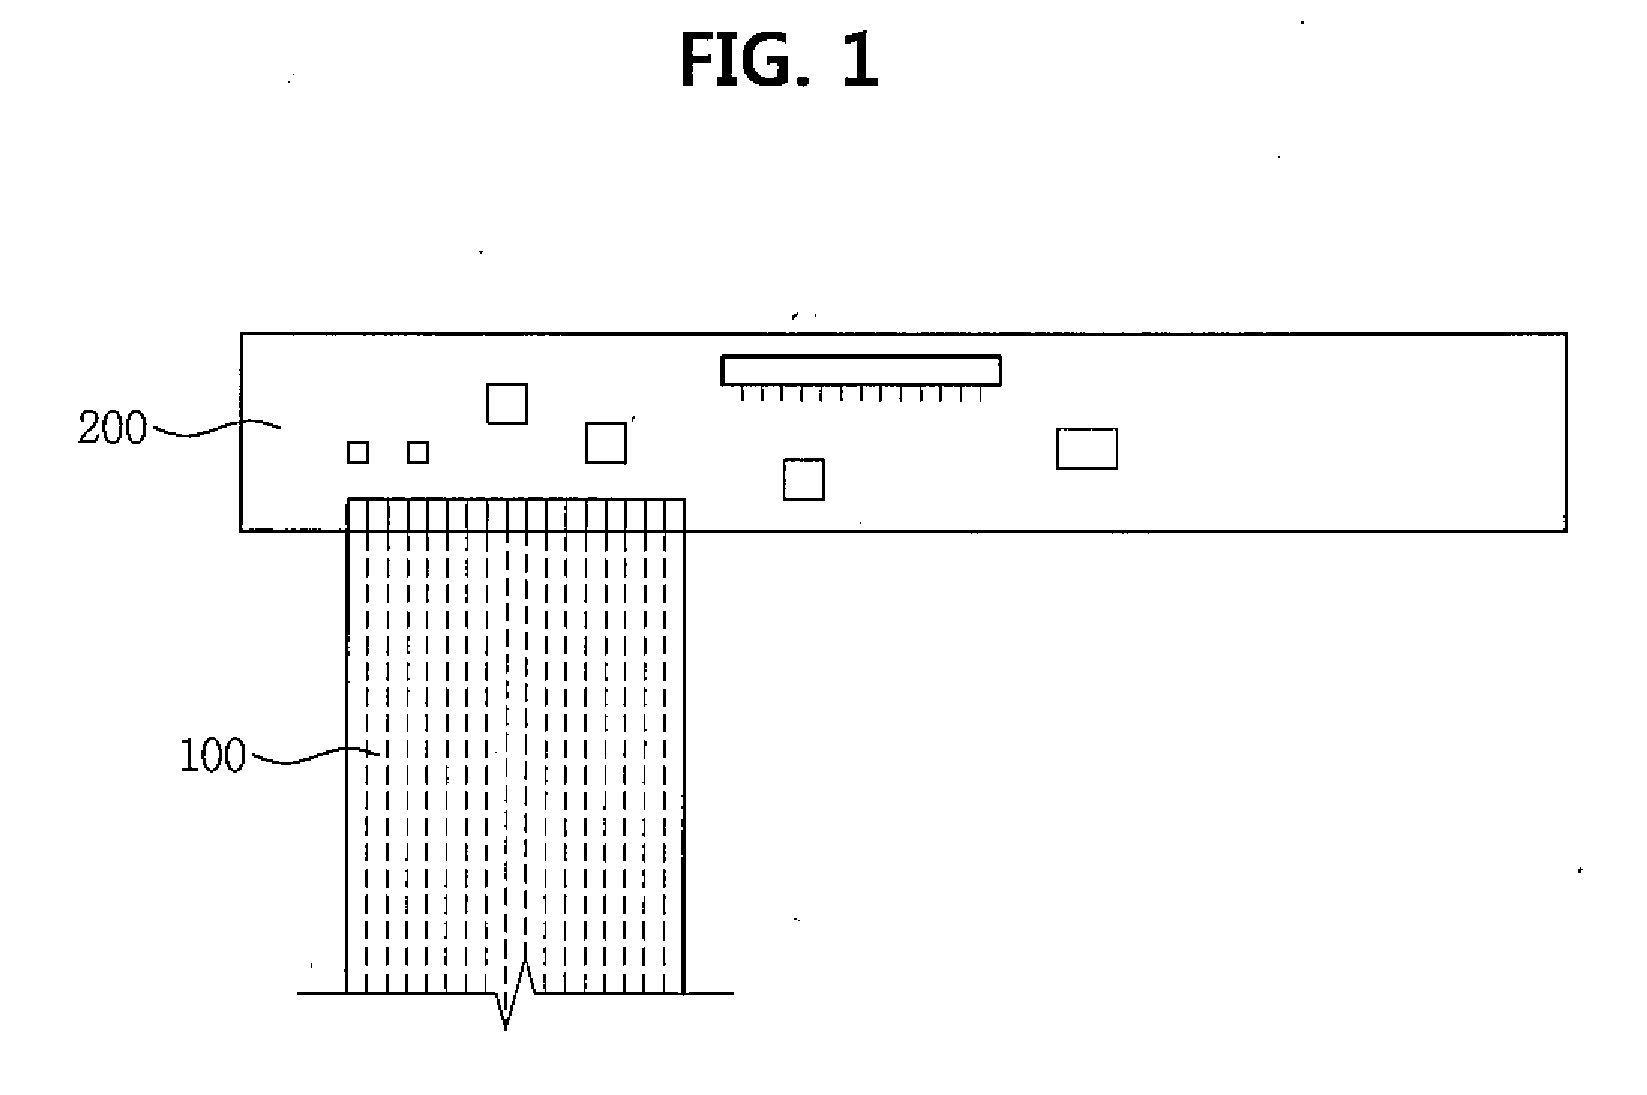 Printed circuit board assembly